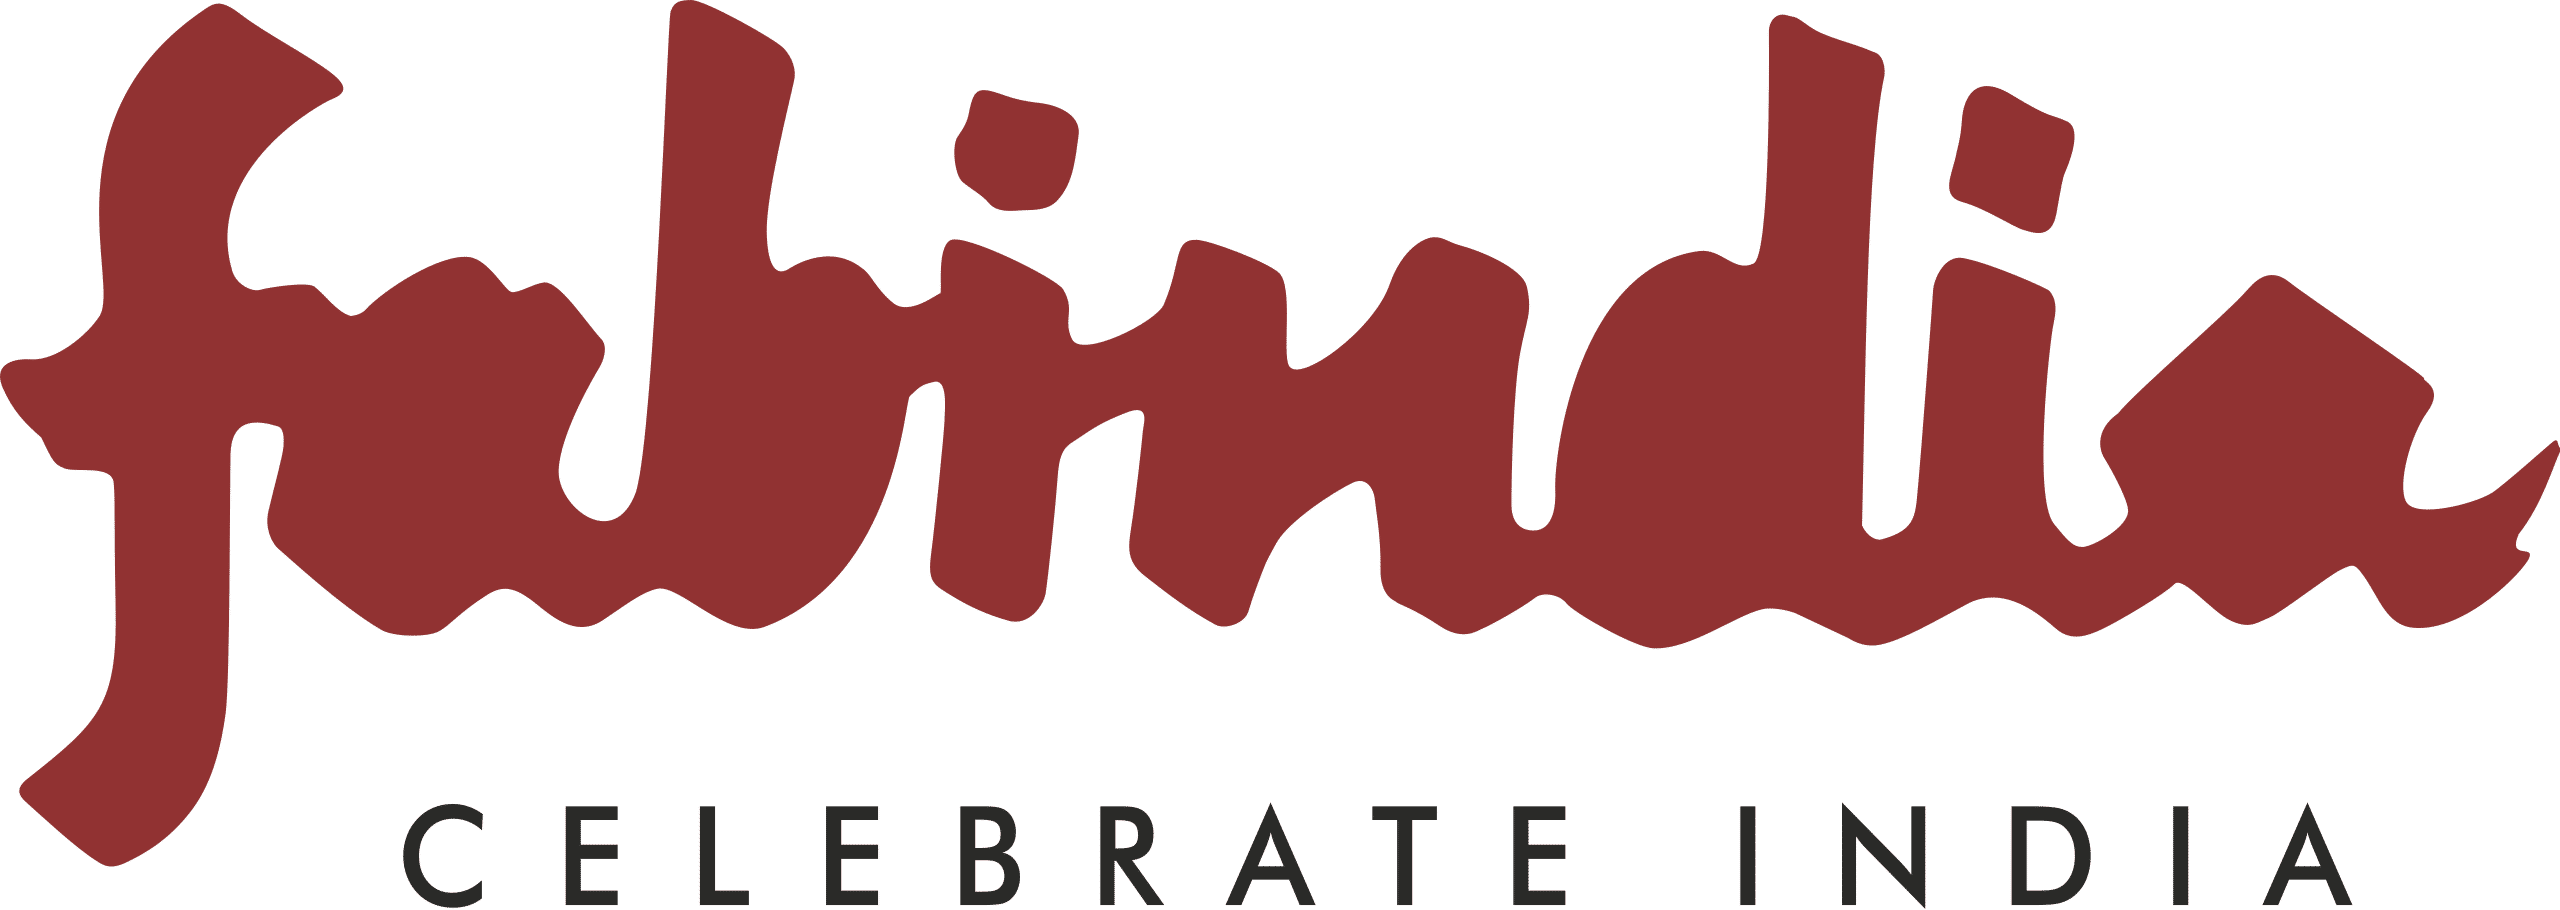 Brand that works with Ekart Logistic - Fabindia